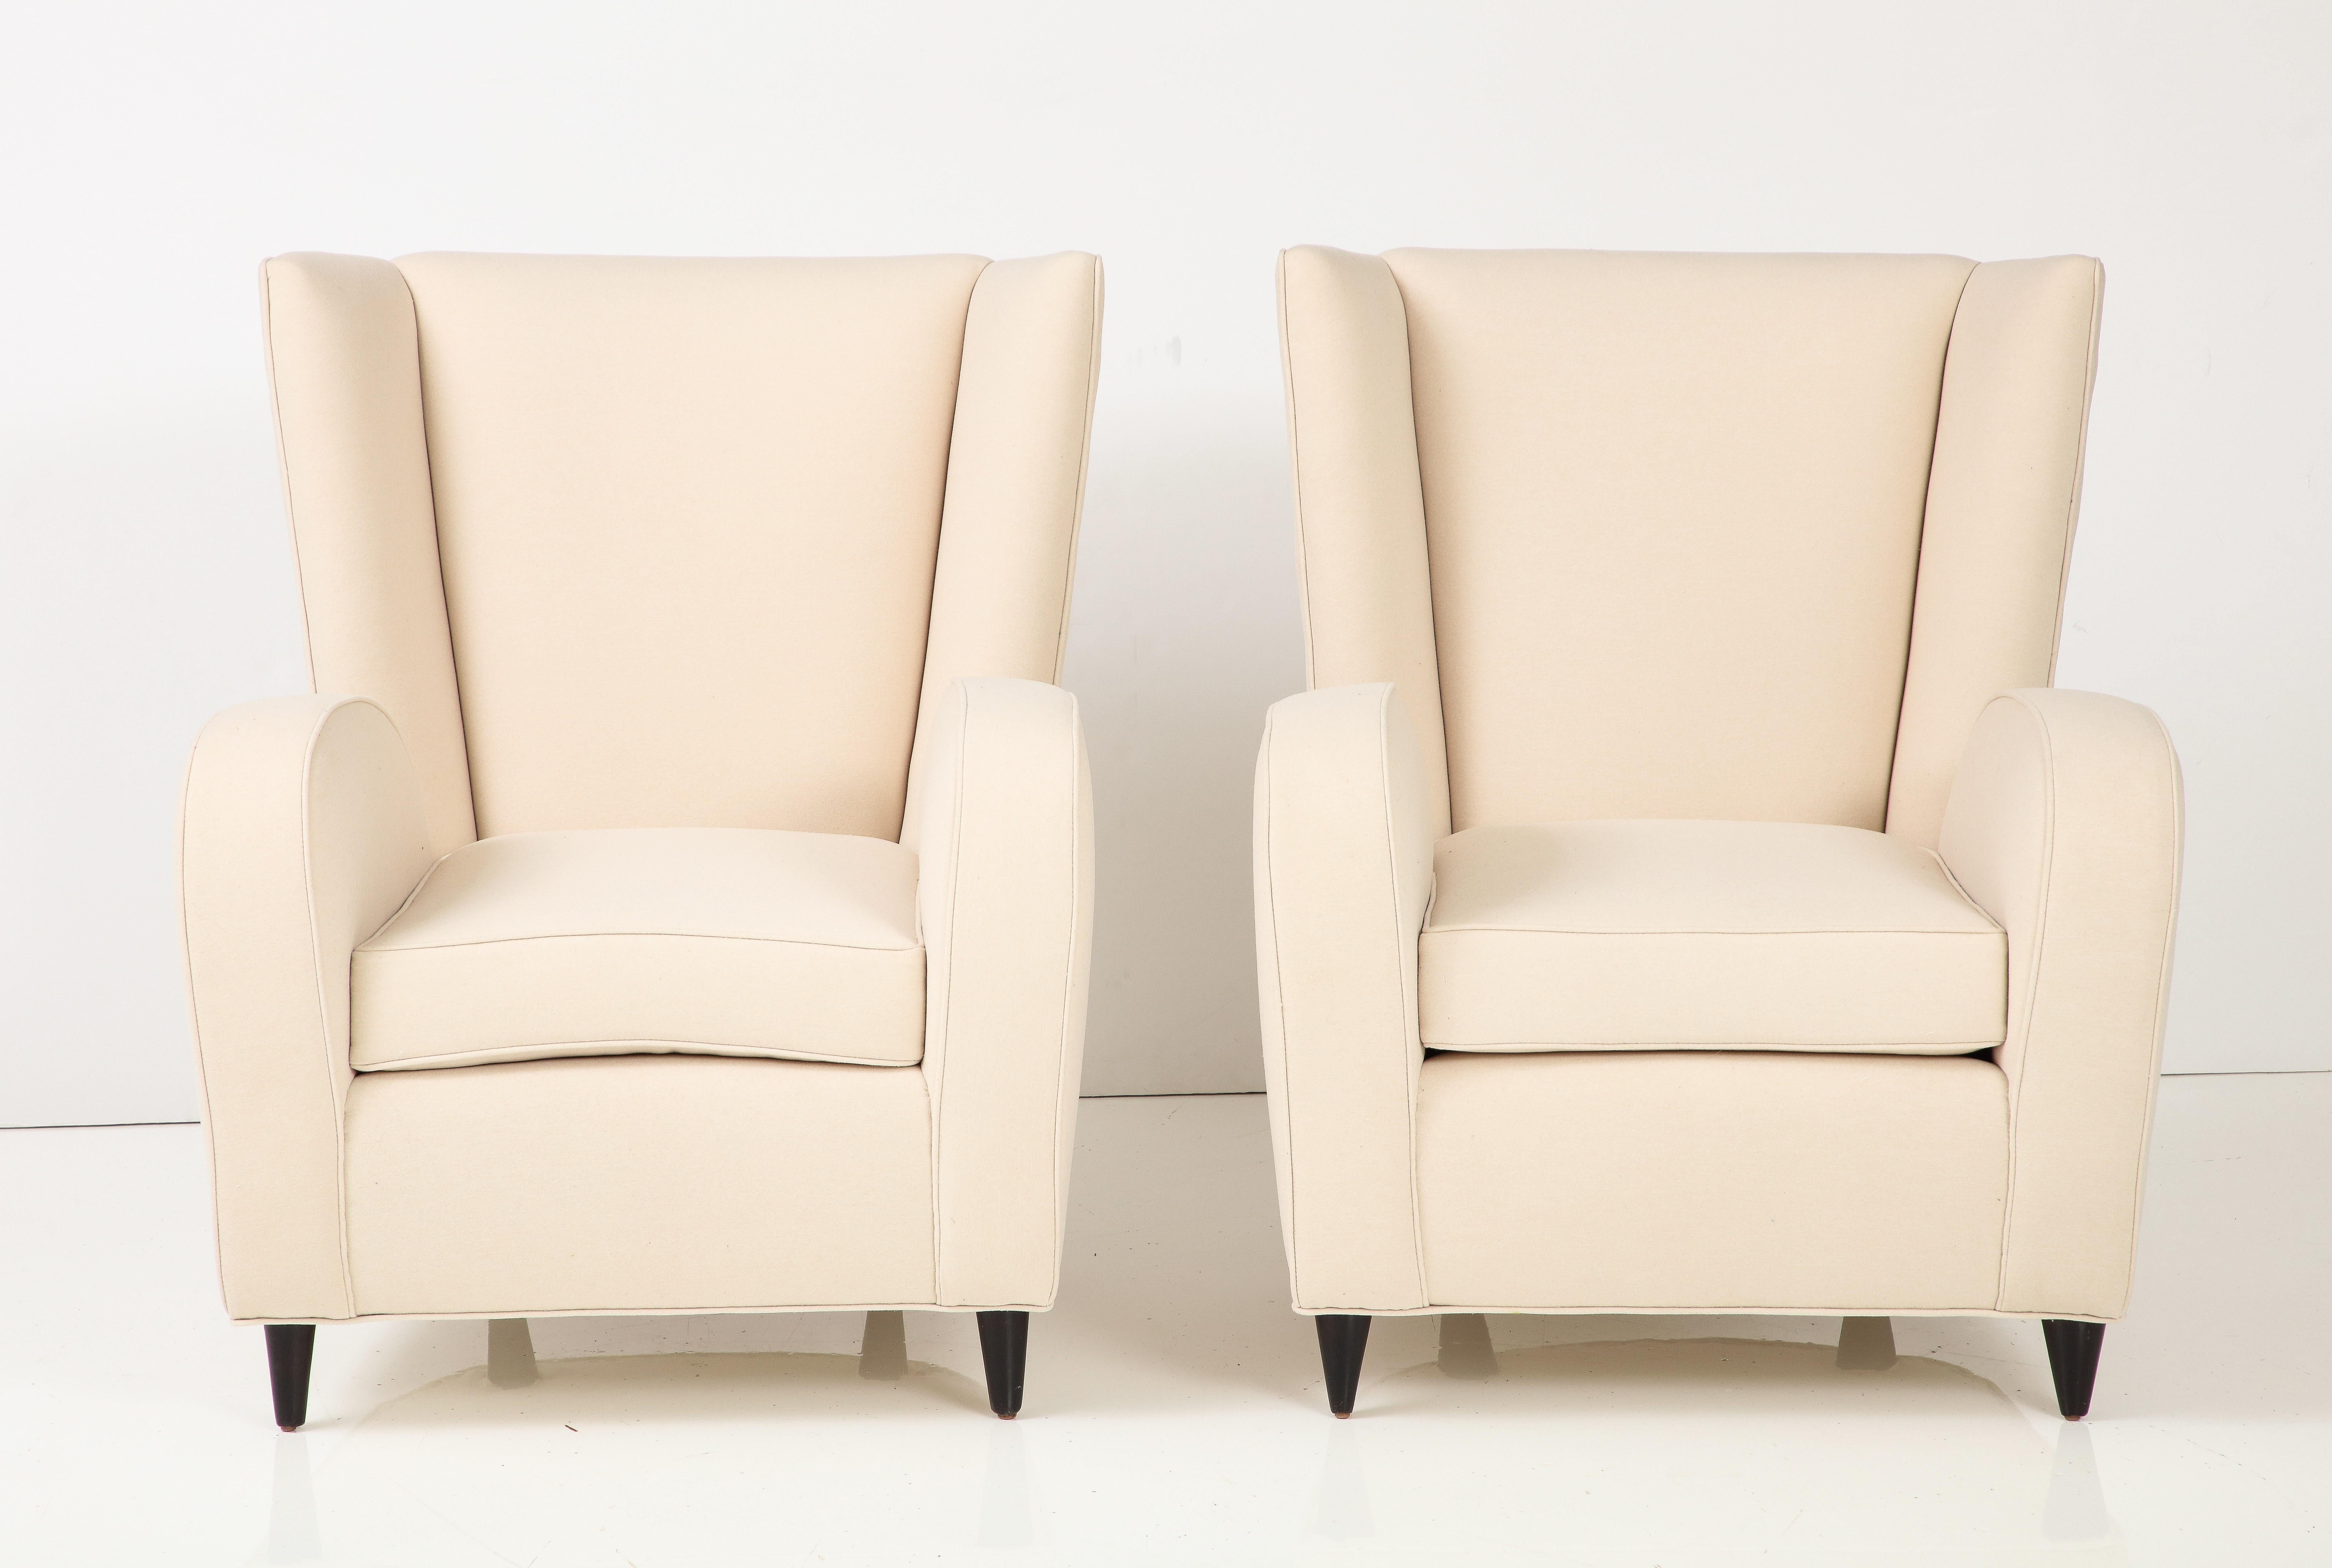 A pair of Paolo Buffa lounge chairs, designed in 1950 for the Hotel Bristol, Merano, an Italian resort. The chairs are indicative of Buffa's signature style, modernist and sleek but with a nod toward the elegant and refined lines of the Neoclassic